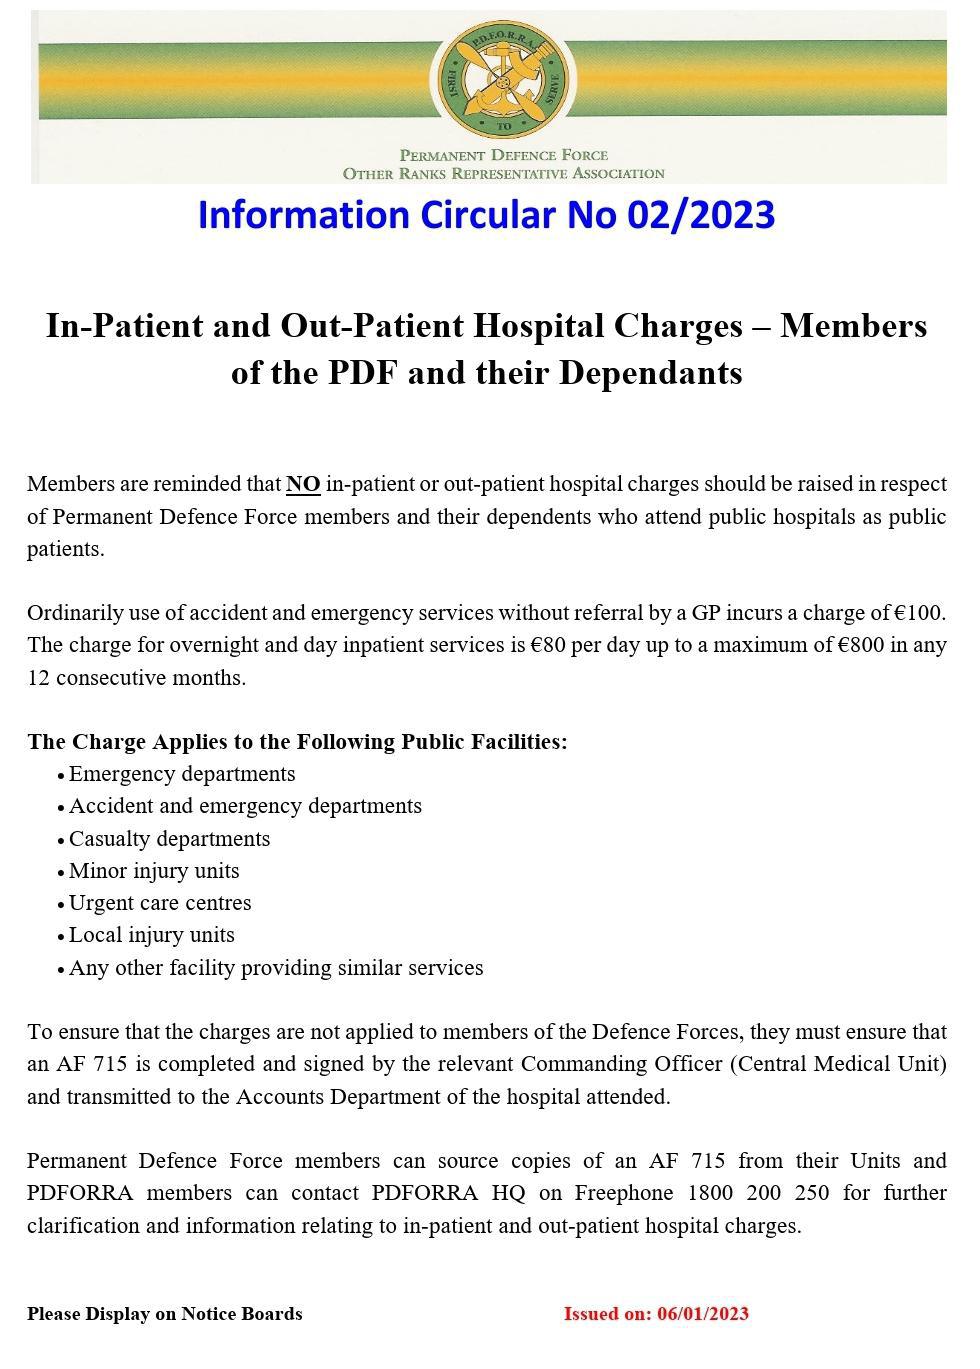 Information Circular No 02 of 23 - In-Patient and Out-Patient Hospital Charges - PDFORRA members and Dependents